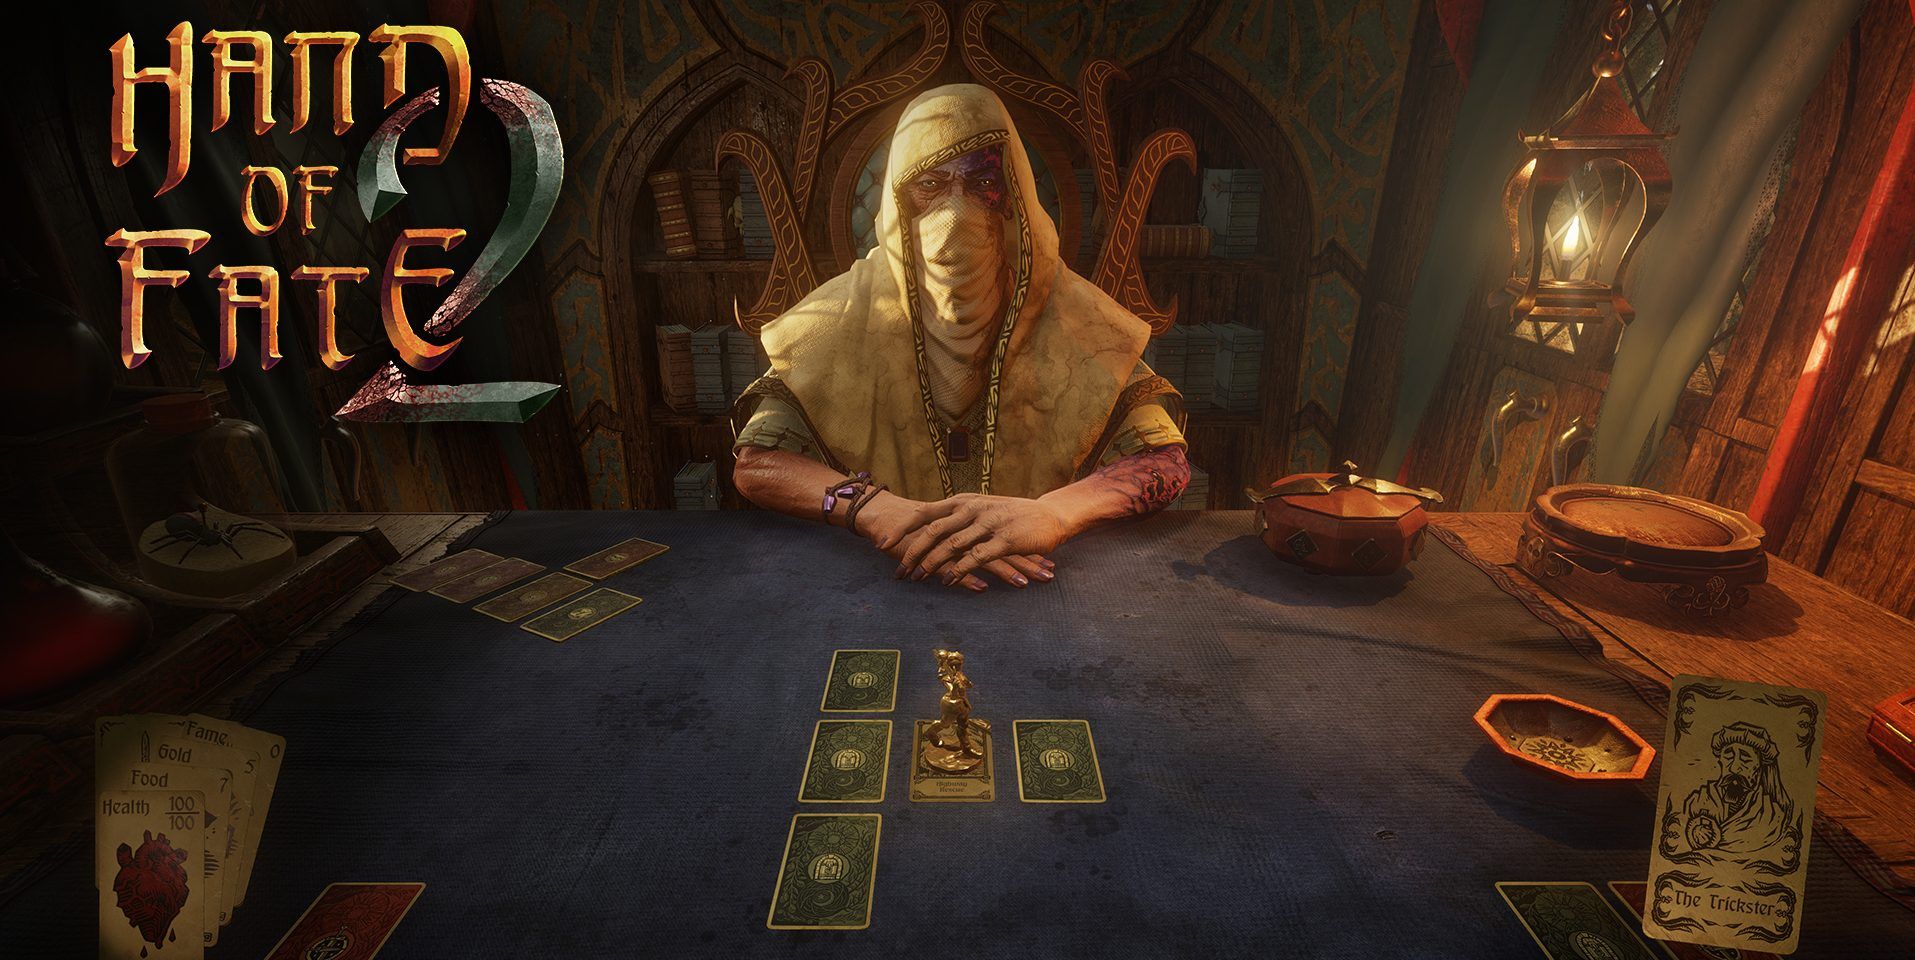 hand of fate 2 questing mace 2